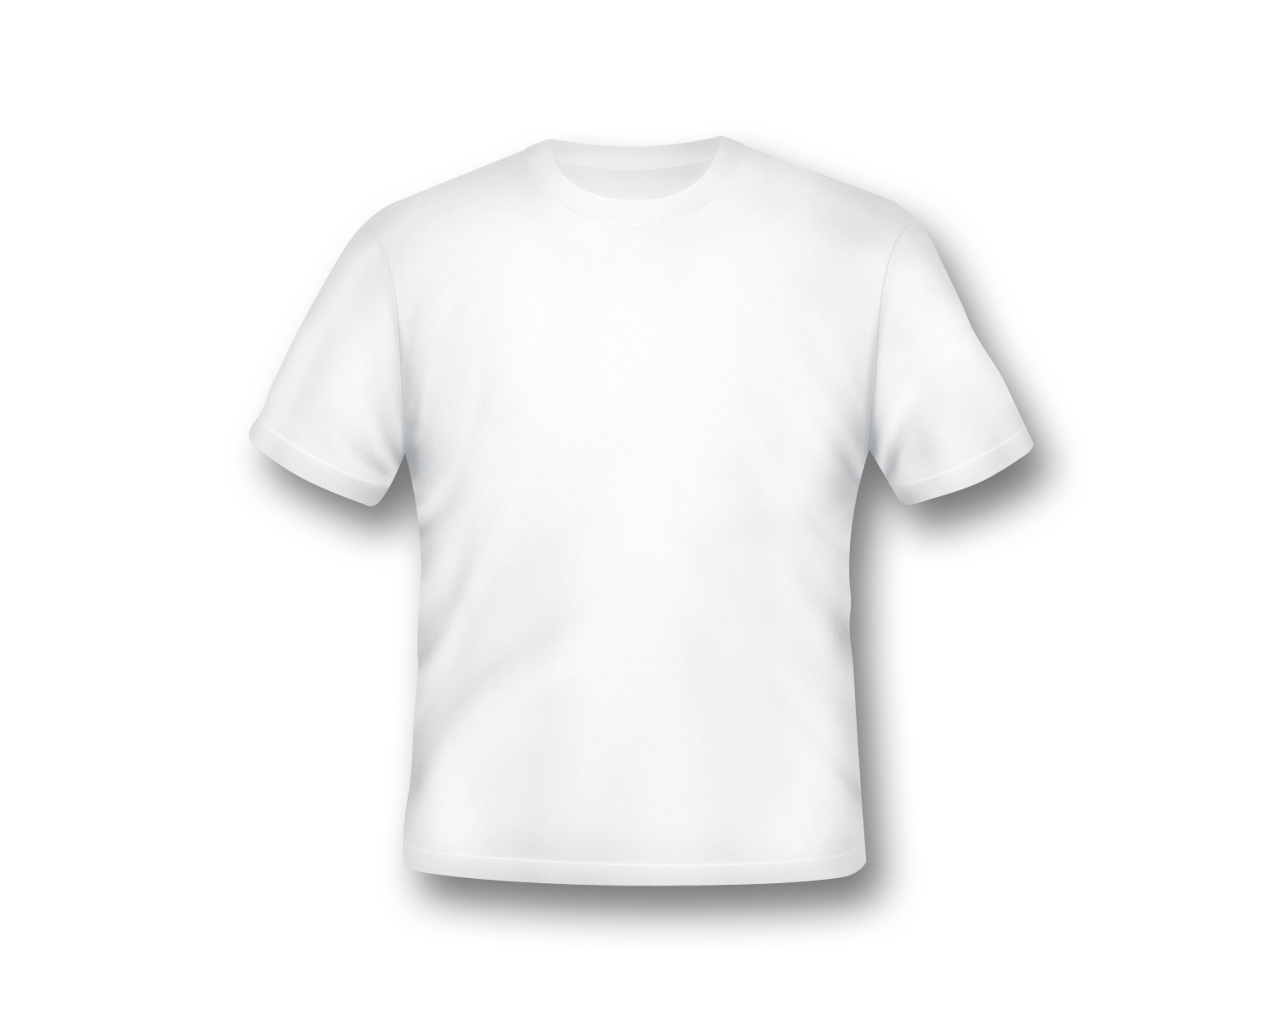 Download Download Blank White T-Shirt Template HQ PNG Image ...